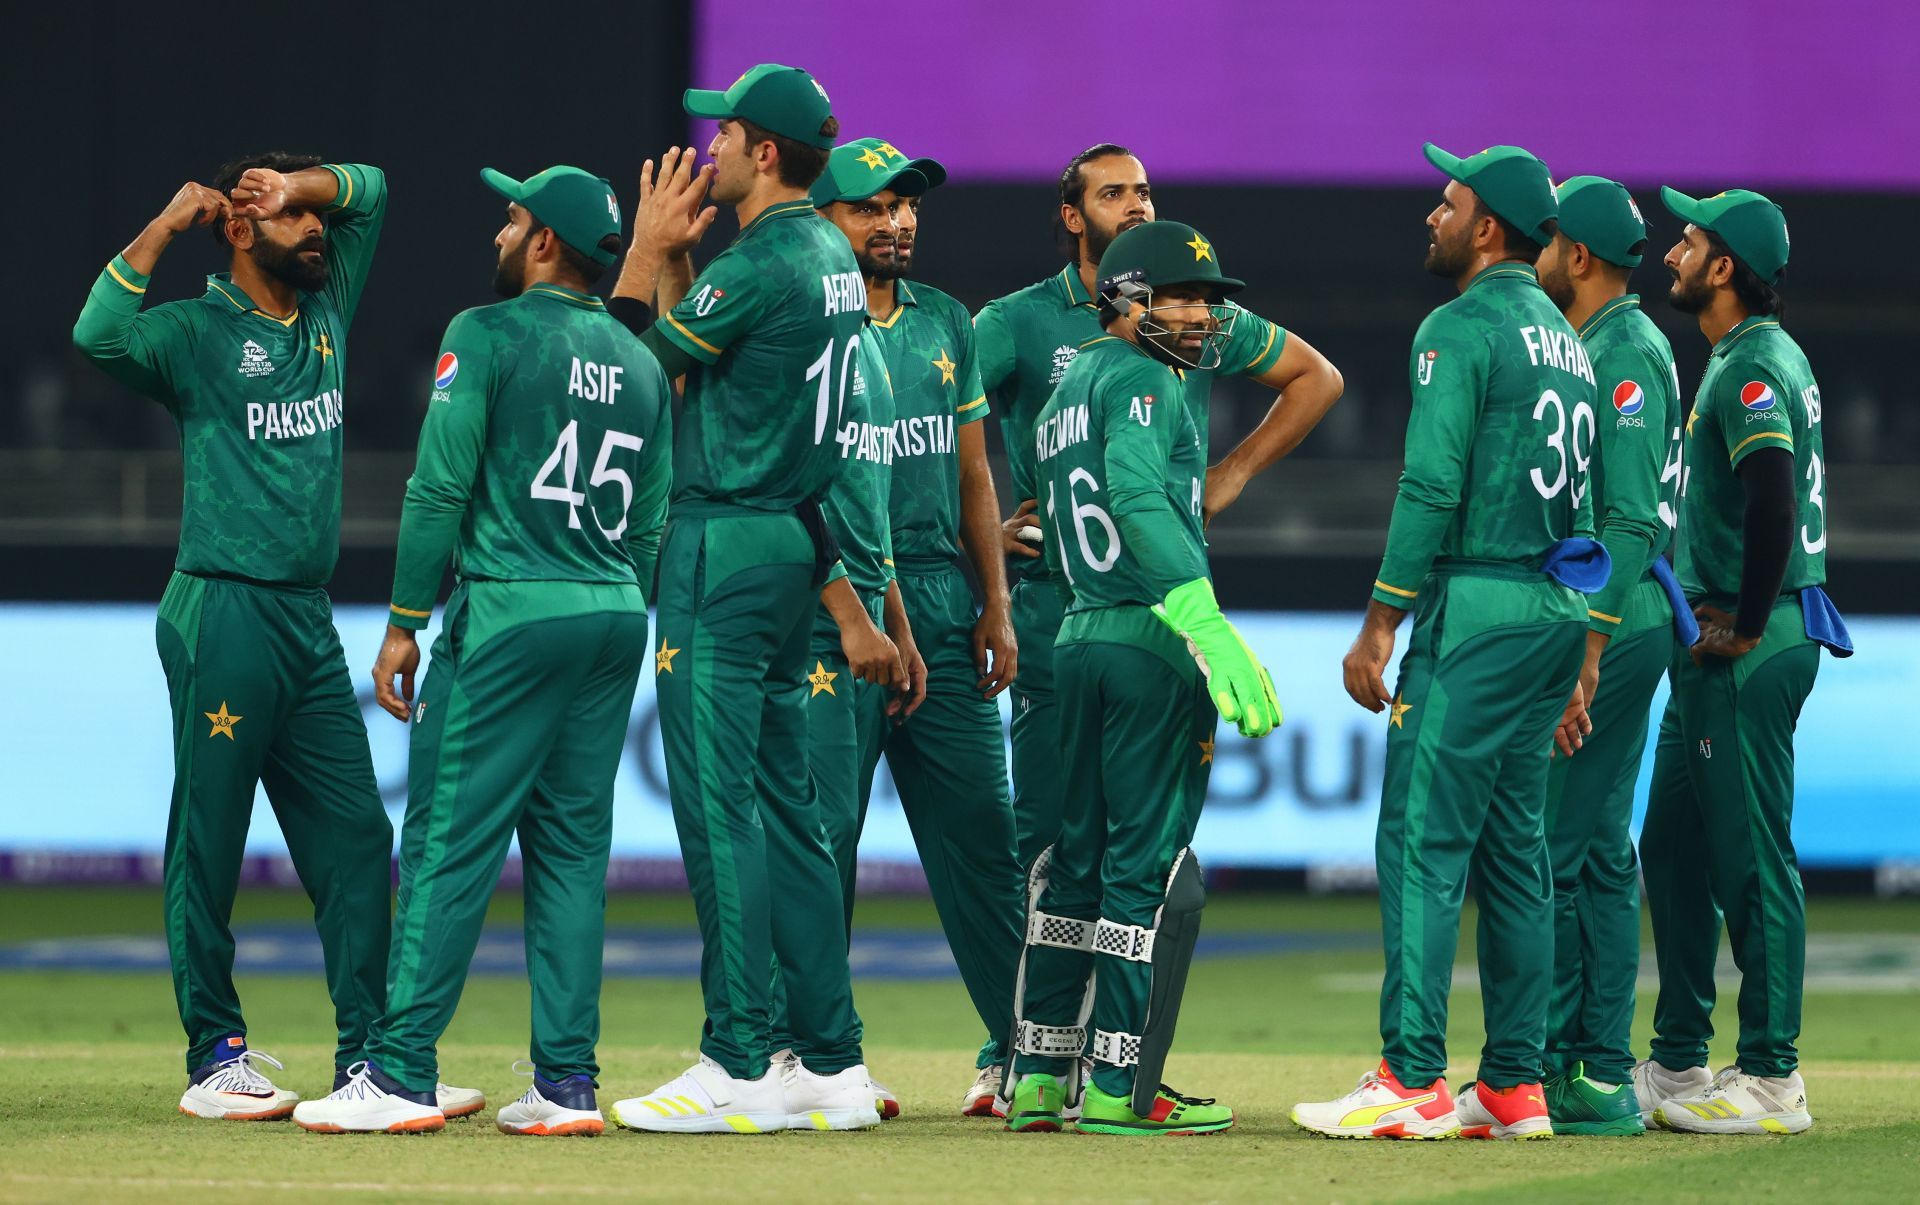 Pakistan will be desperate for a win against New Zealand